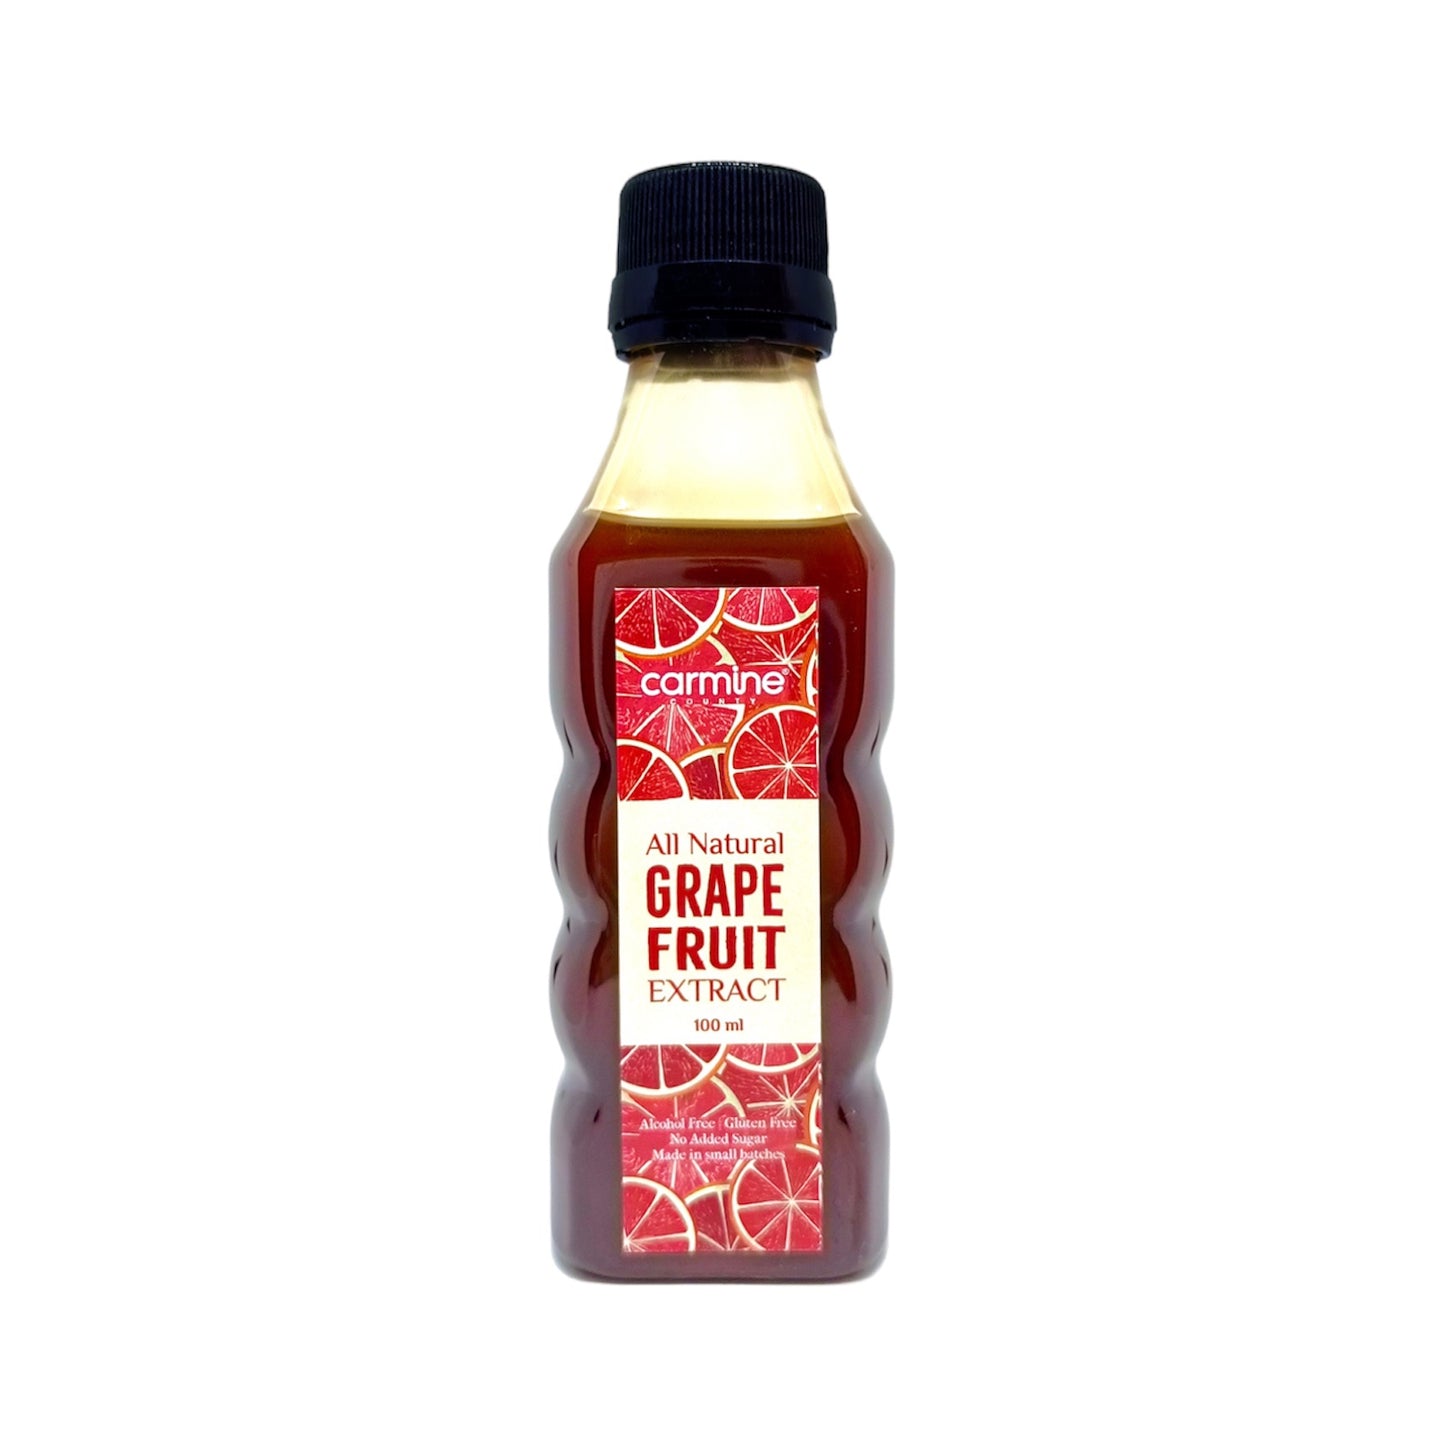 Carmine County All Natural Grapefruit Extract 100 ml